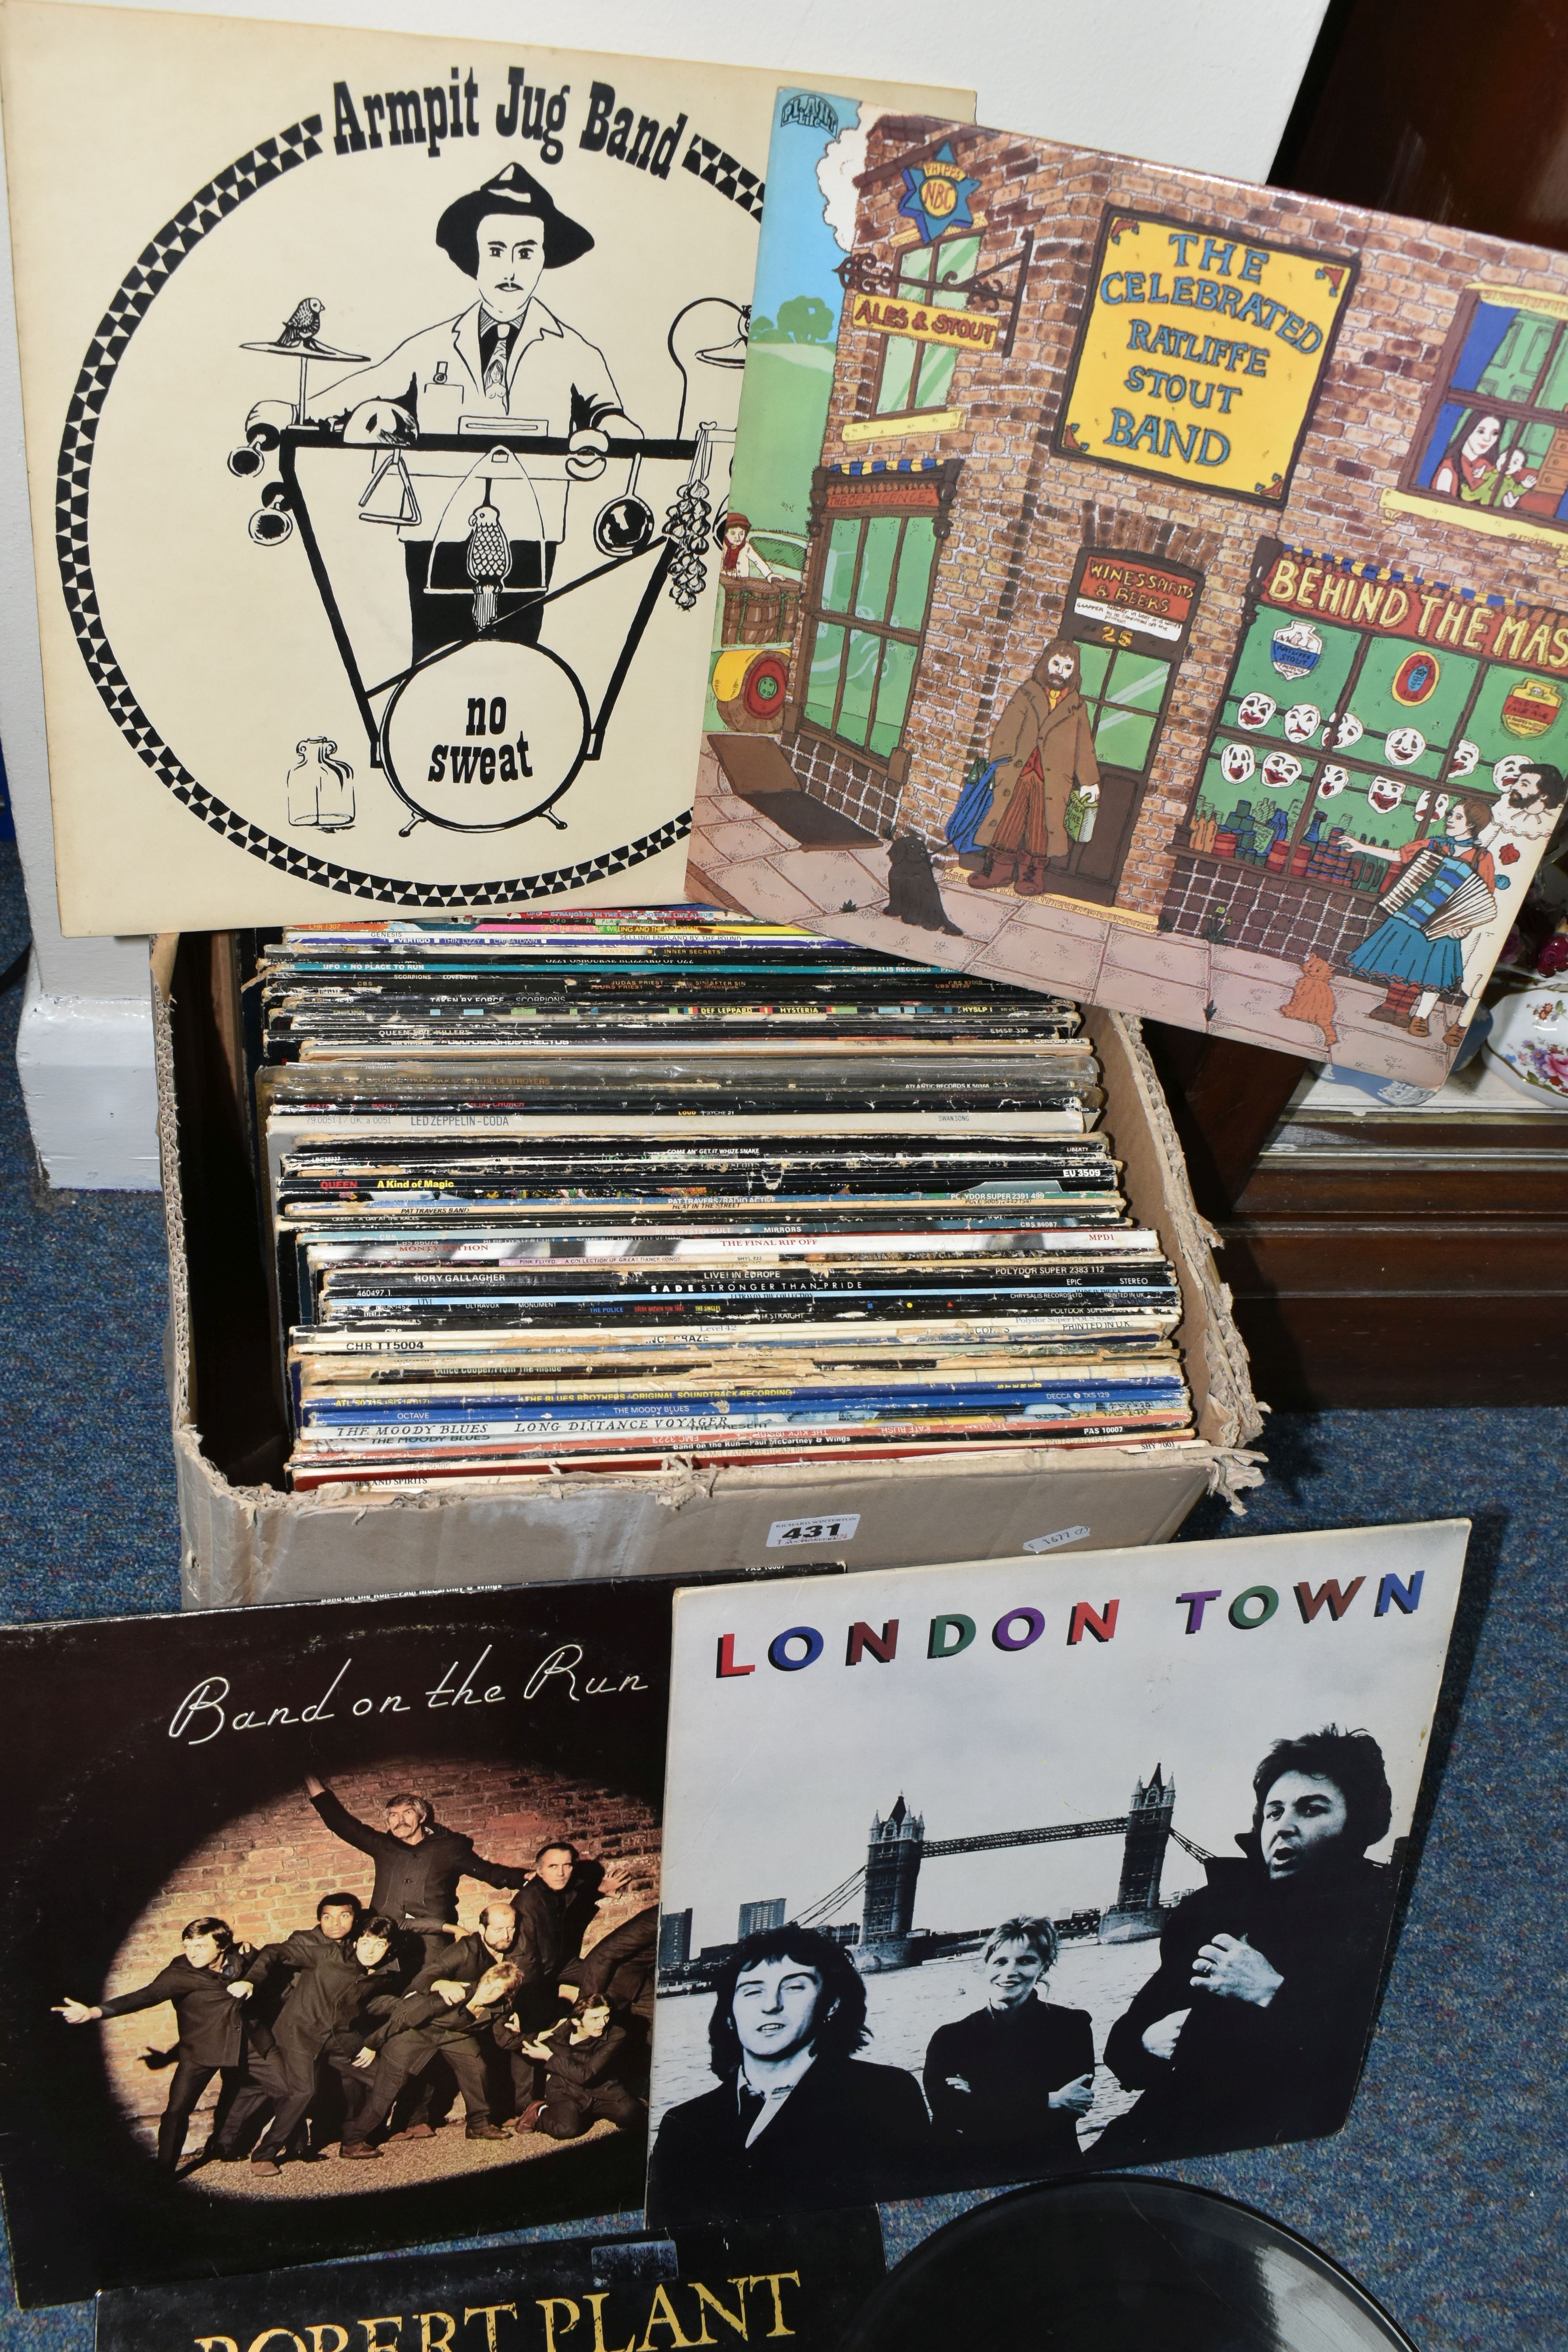 A BOX OF APPROXIMATELY SEVENTY-FIVE LP RECORDS, artists include Don McLean, Wings, Moody Blues, Pink - Image 2 of 3